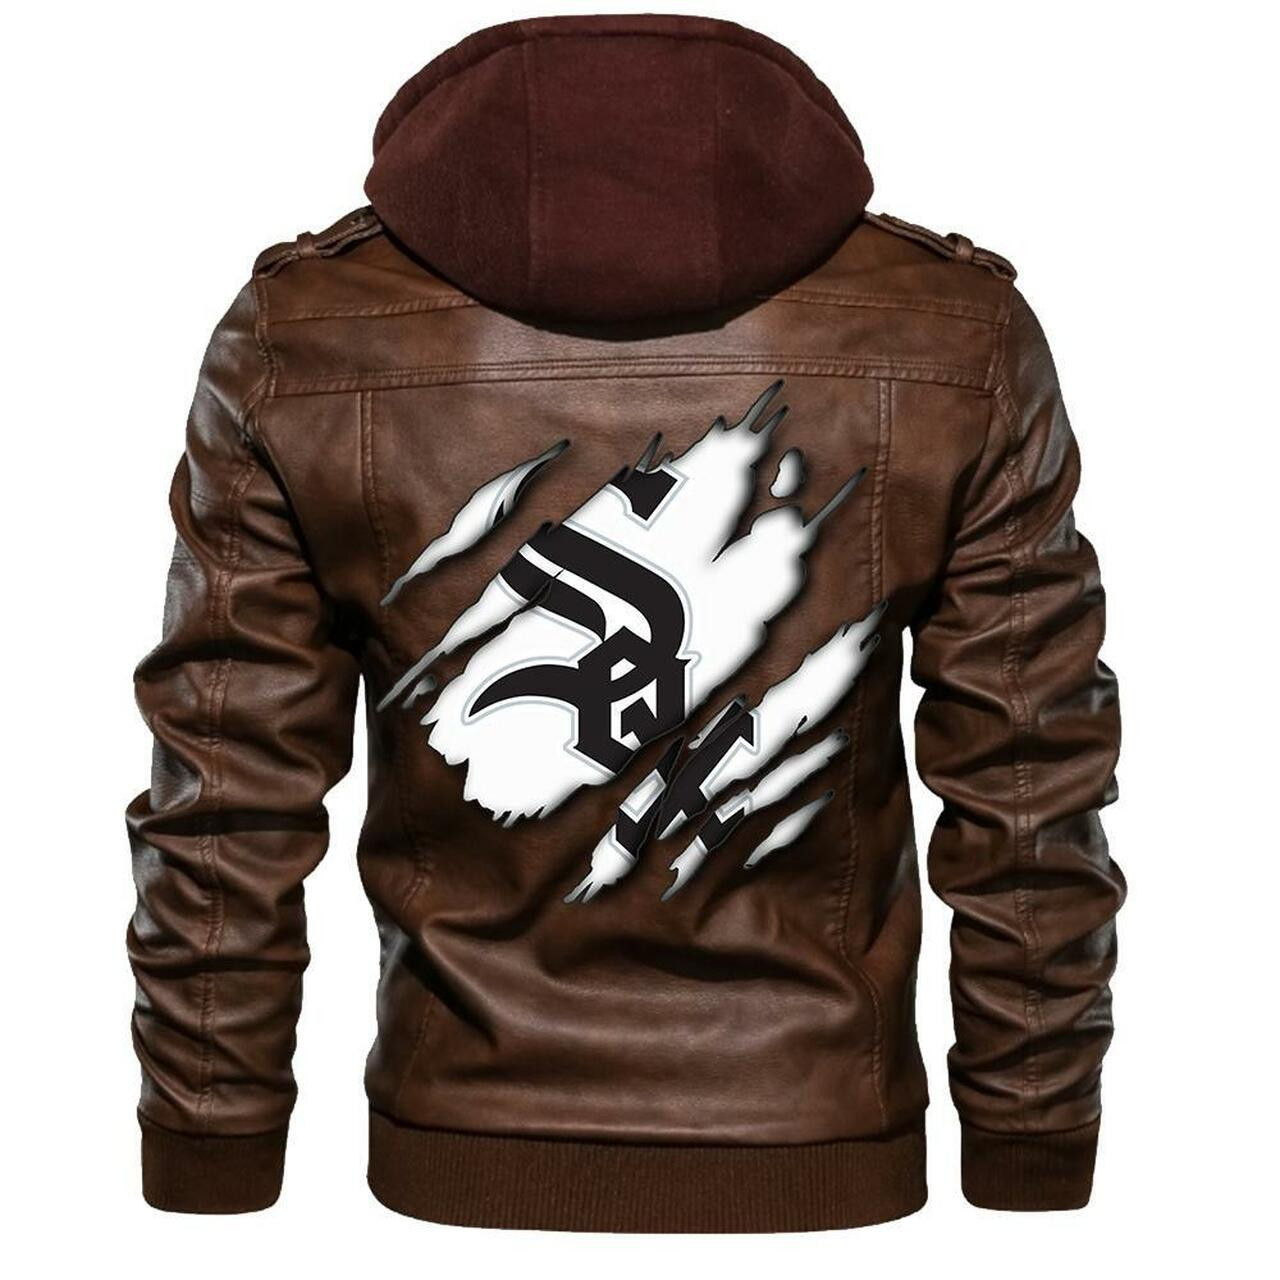 These Amazing Leather Jacket will add to the appeal of your outfit 38